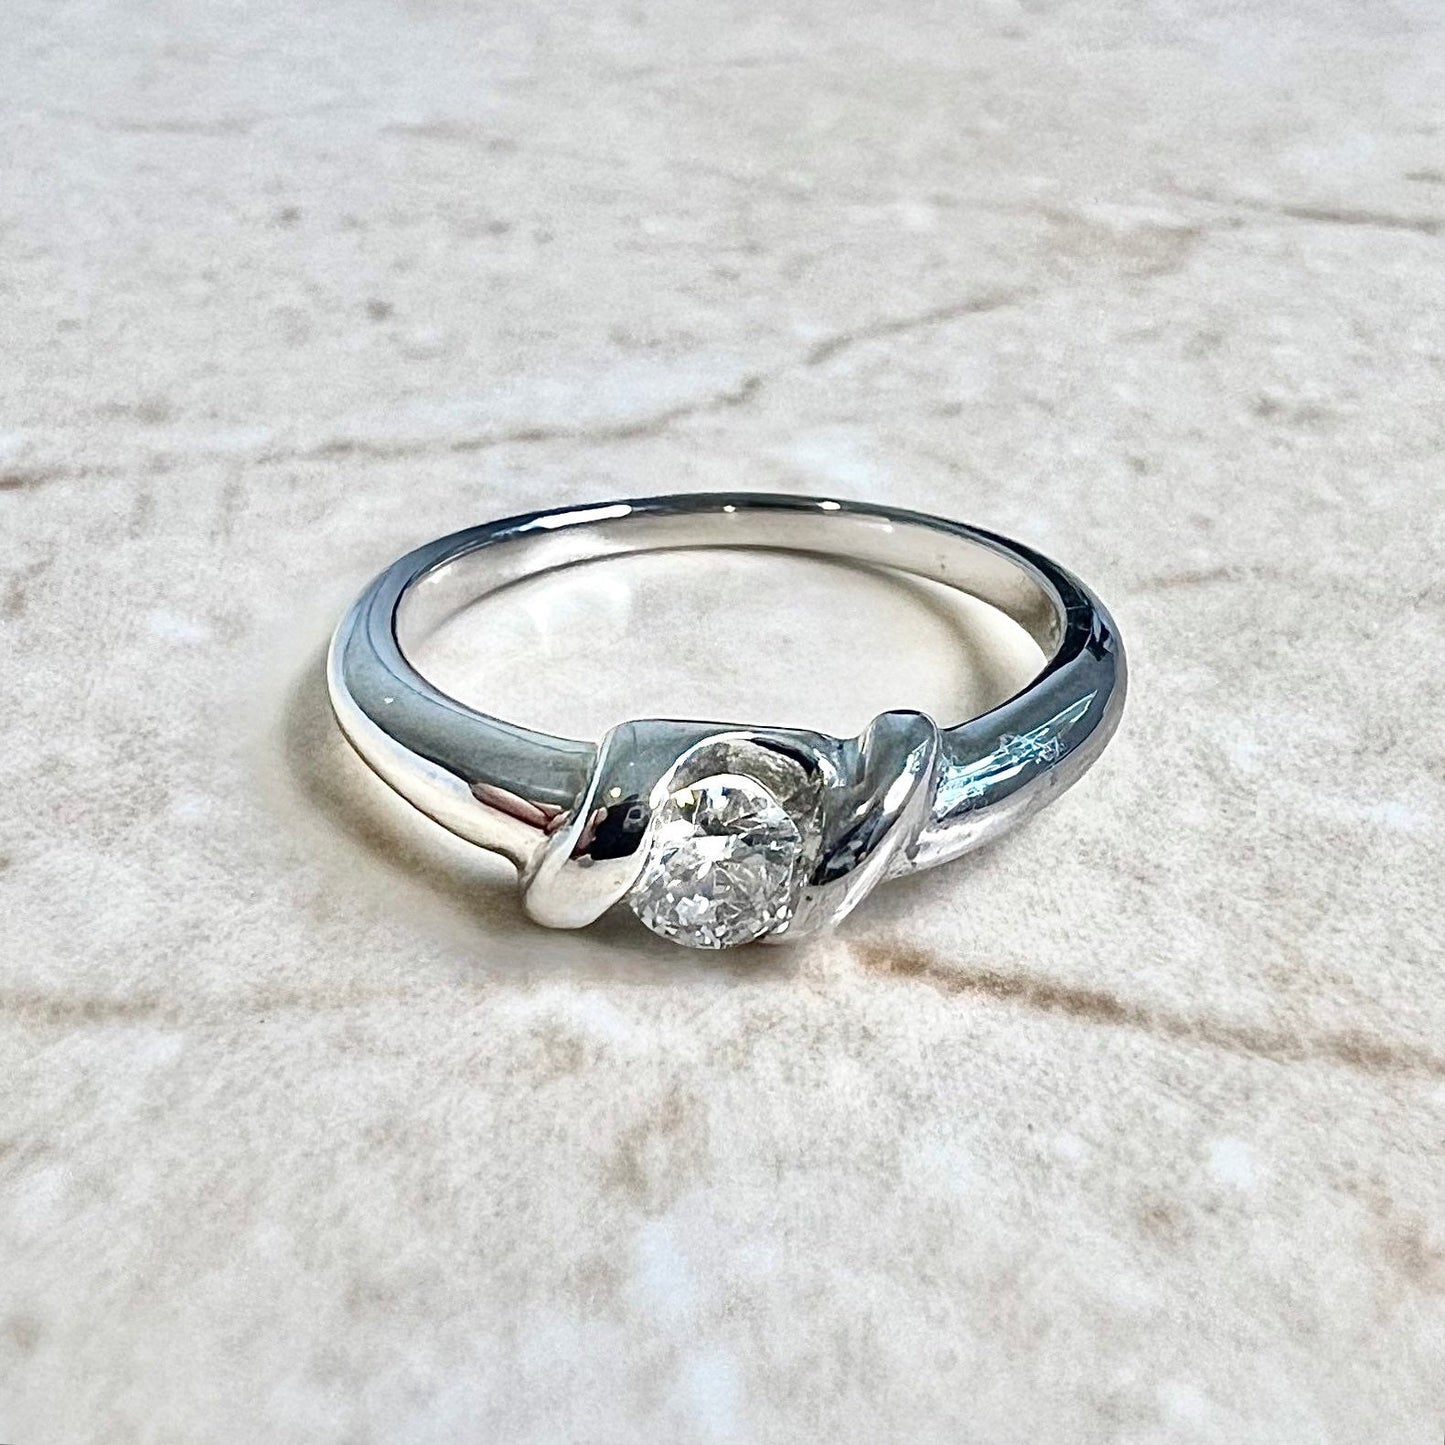 Vintage 14K Diamond Engagement Ring 0.25 CT - White Gold Diamond Solitaire Ring - Promise Ring - Diamond Wedding Ring - Best Gifts For Her